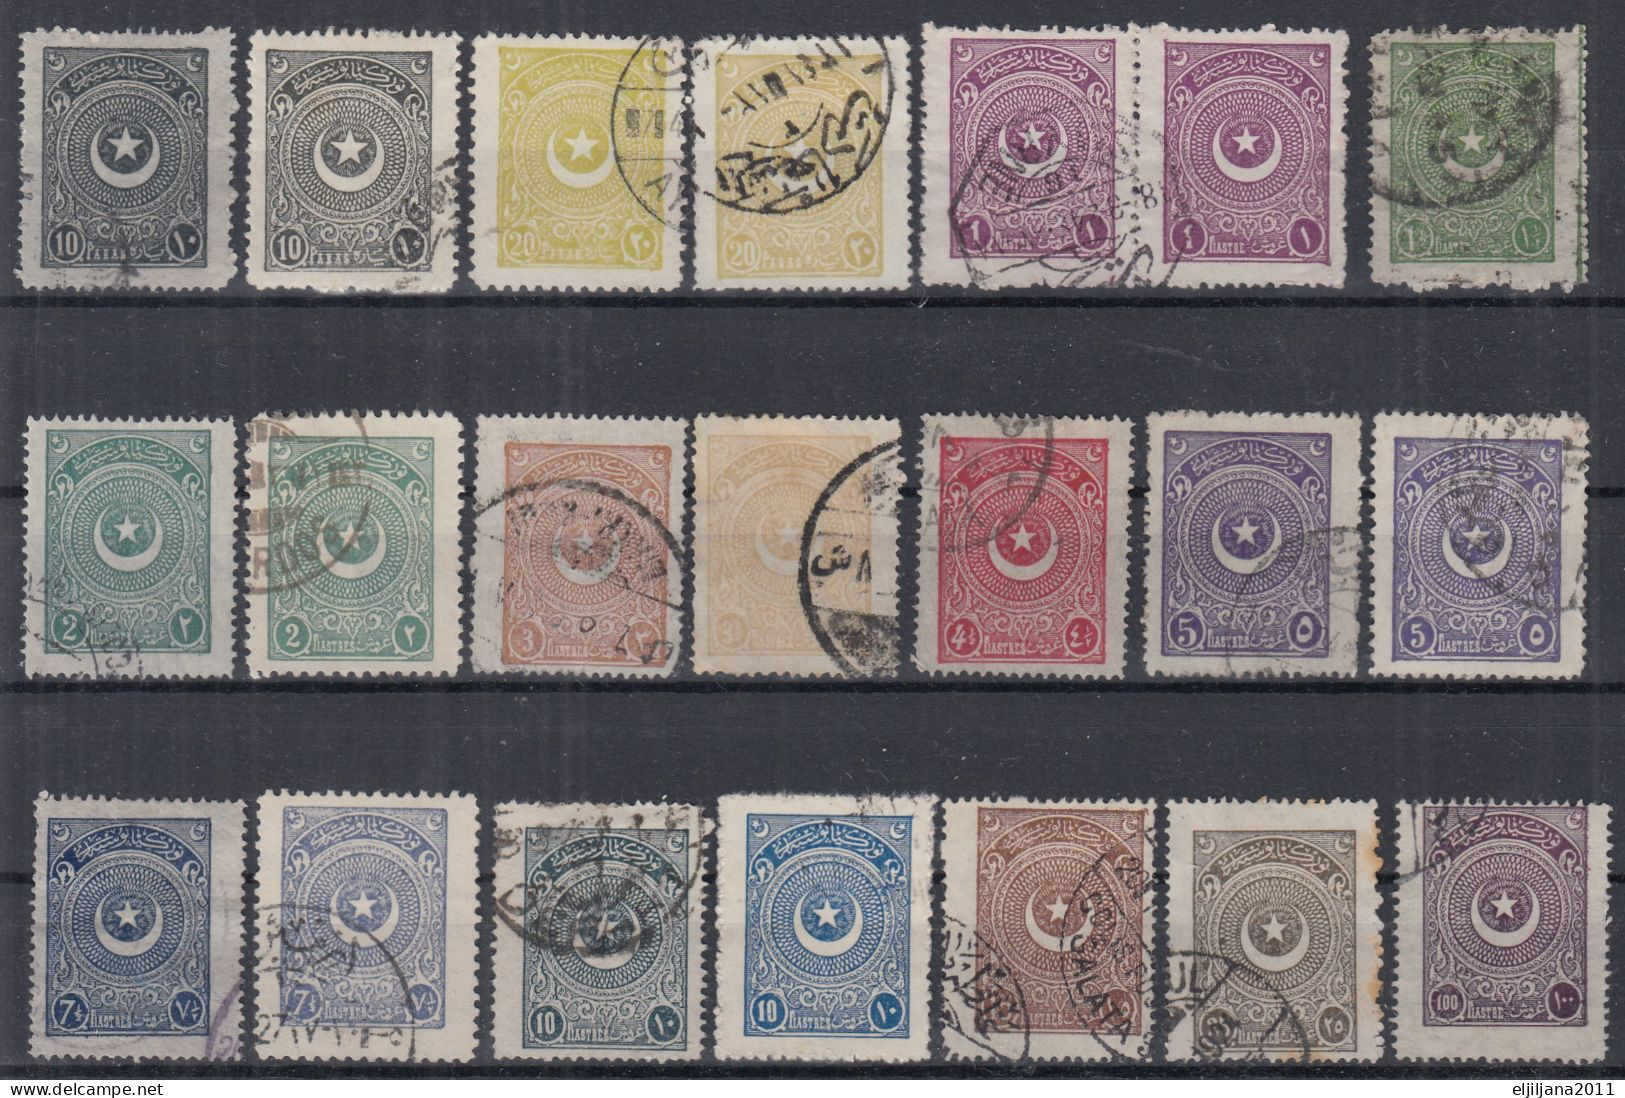 Action !! SALE !! 50 % Turkey / Türkei 1923 - 1925 ⁕ Star And Crescent In A Circle ⁕ 21v Used / Shades - Different Perf. - Gebruikt